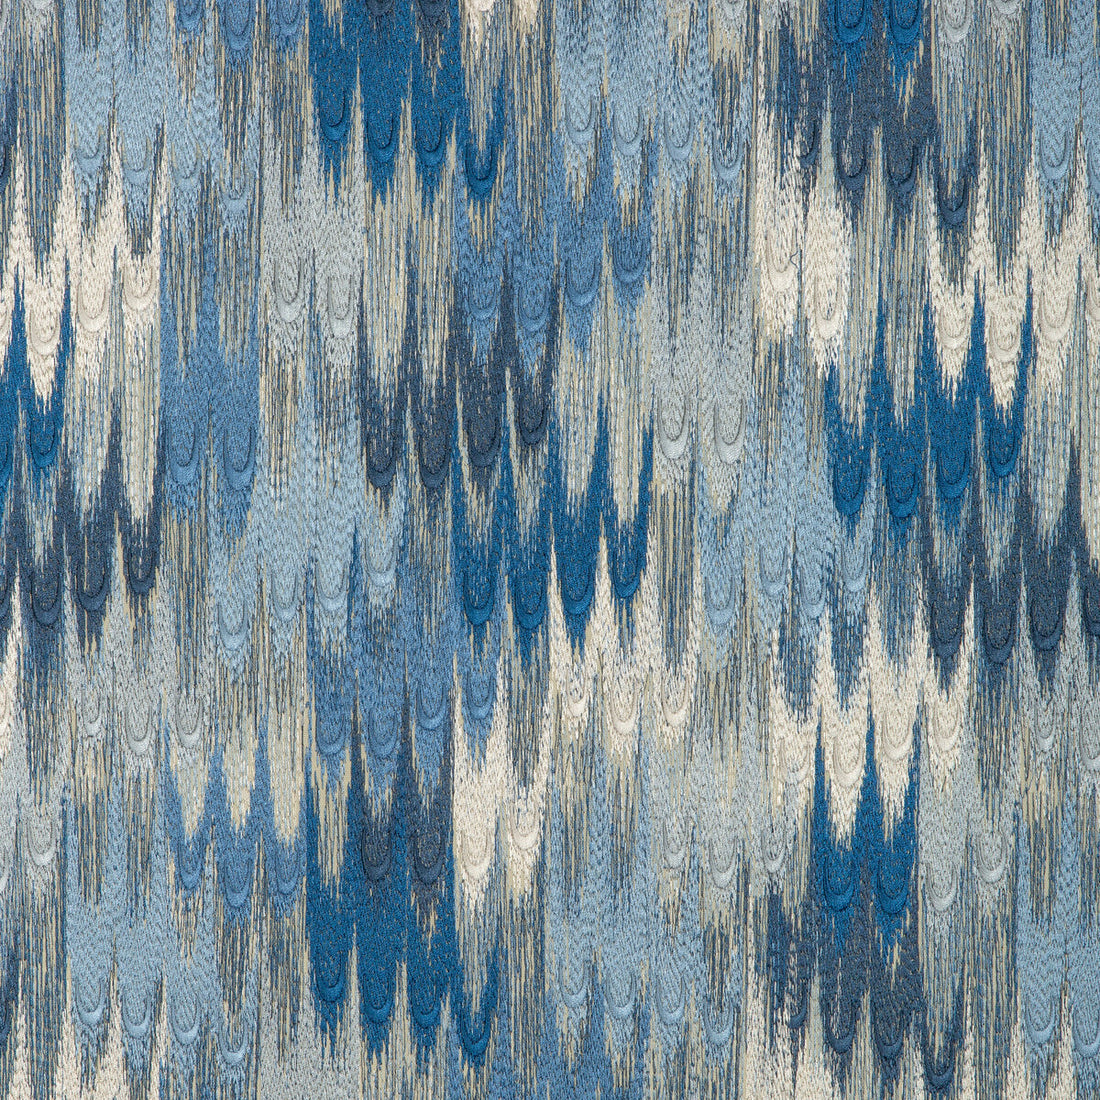 Duval Emb fabric in sky/lapis color - pattern 8023142.155.0 - by Brunschwig &amp; Fils in the Celeste collection